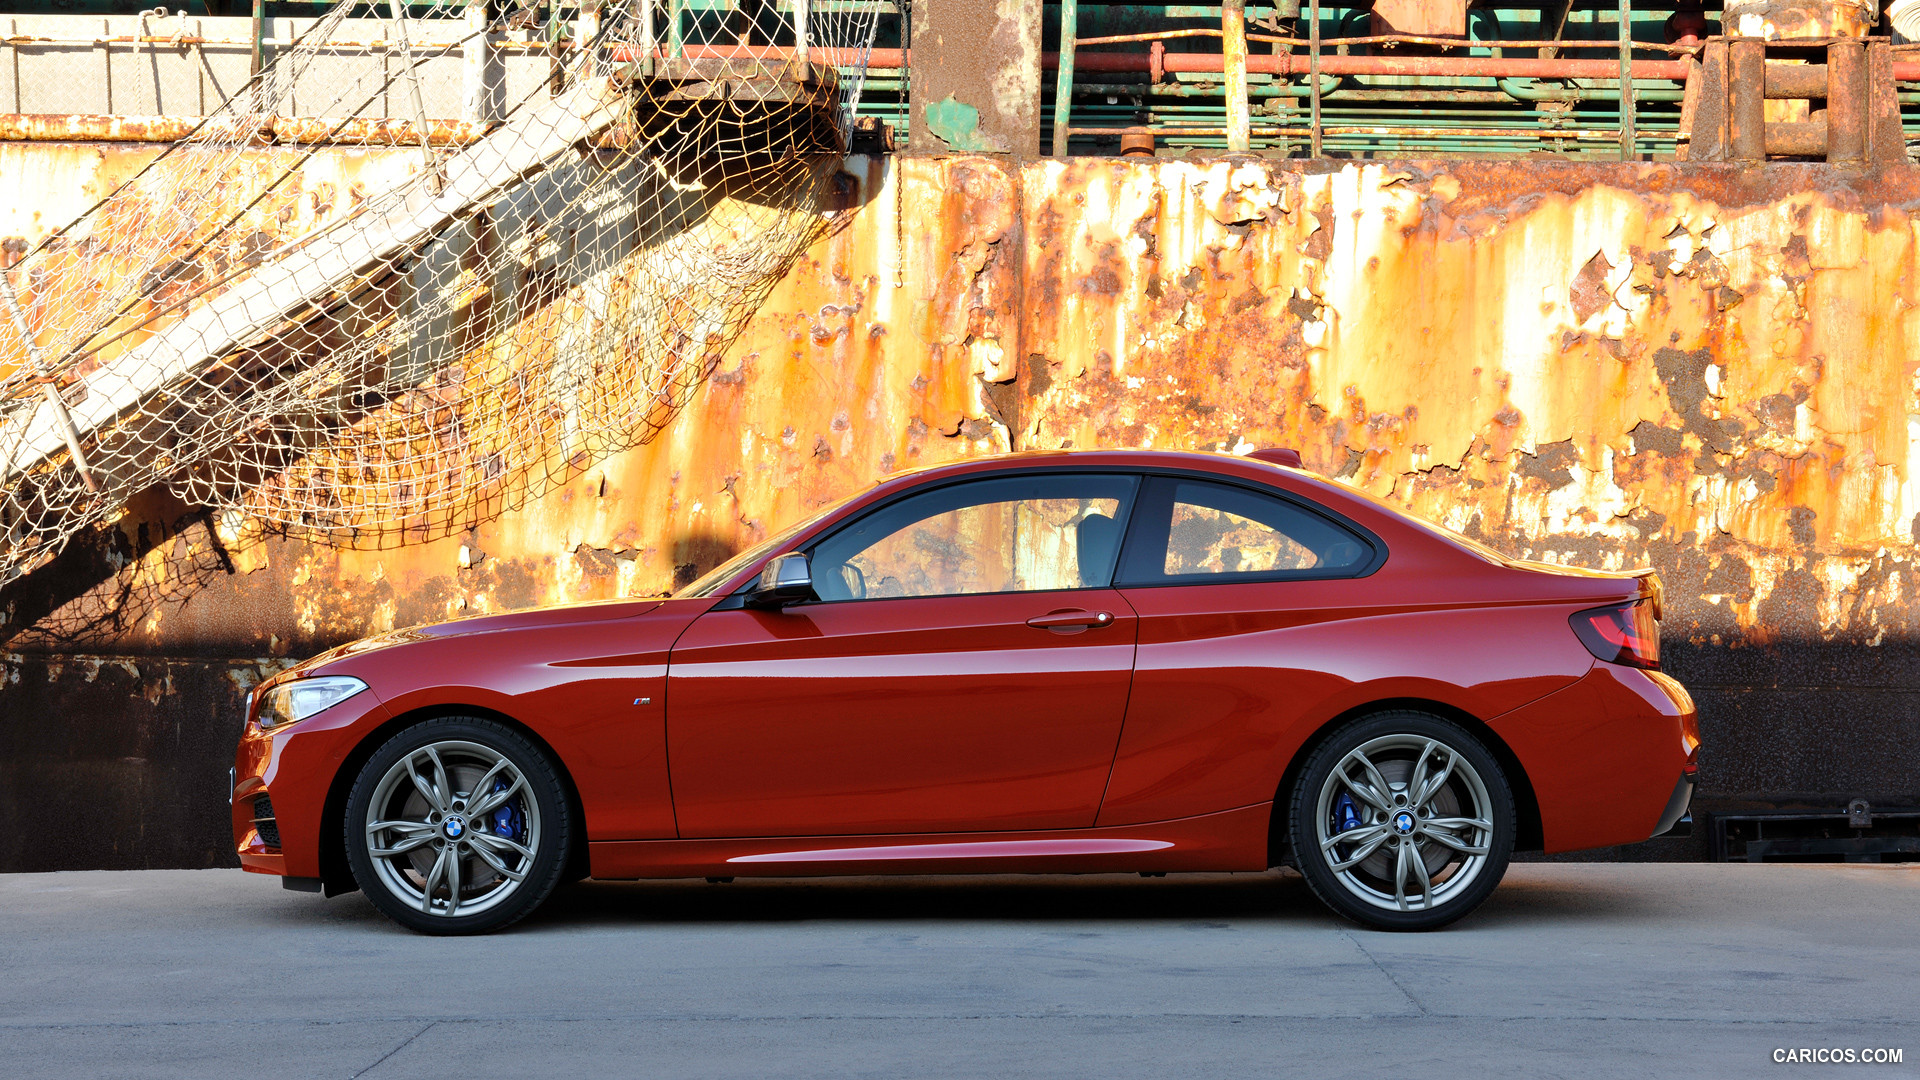 2014 BMW M235i Coupe Pics, Vehicles Collection